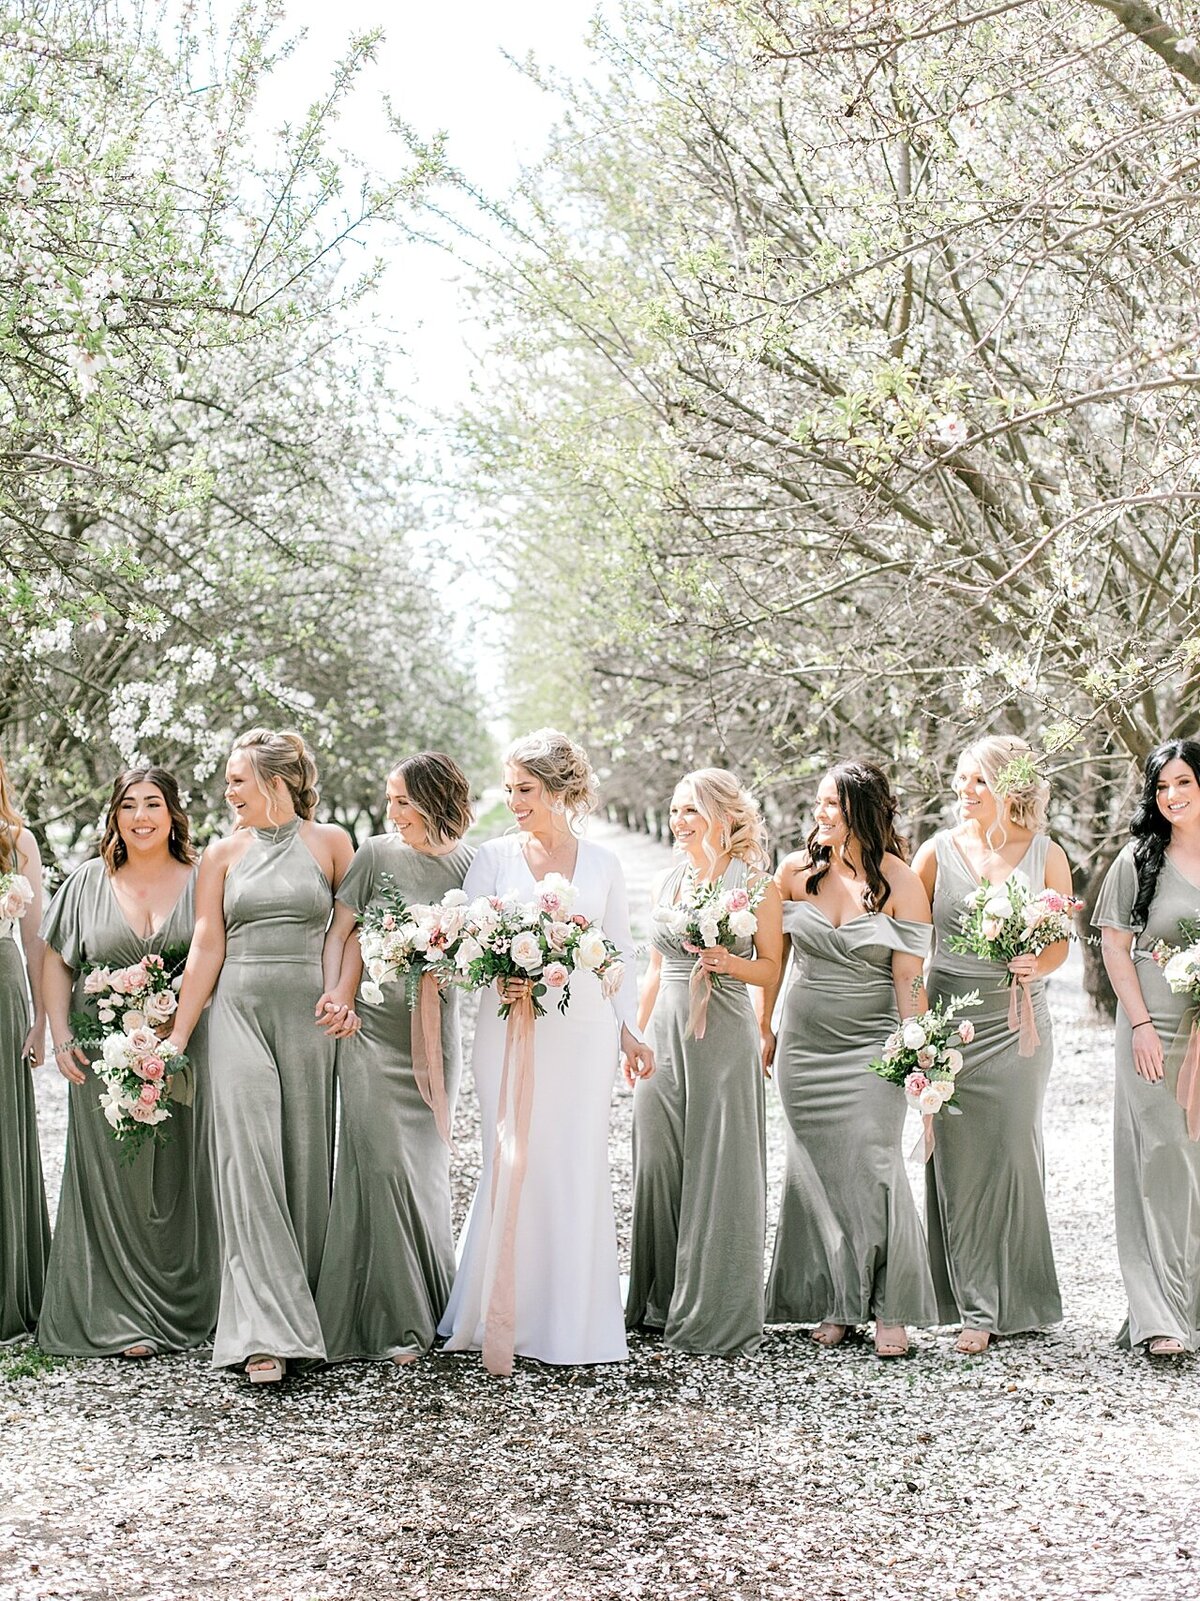 Emerald grace floral design wedding with Lauren Westra photography almond orchard bride and groom soft blush color palette central california weddings_2504